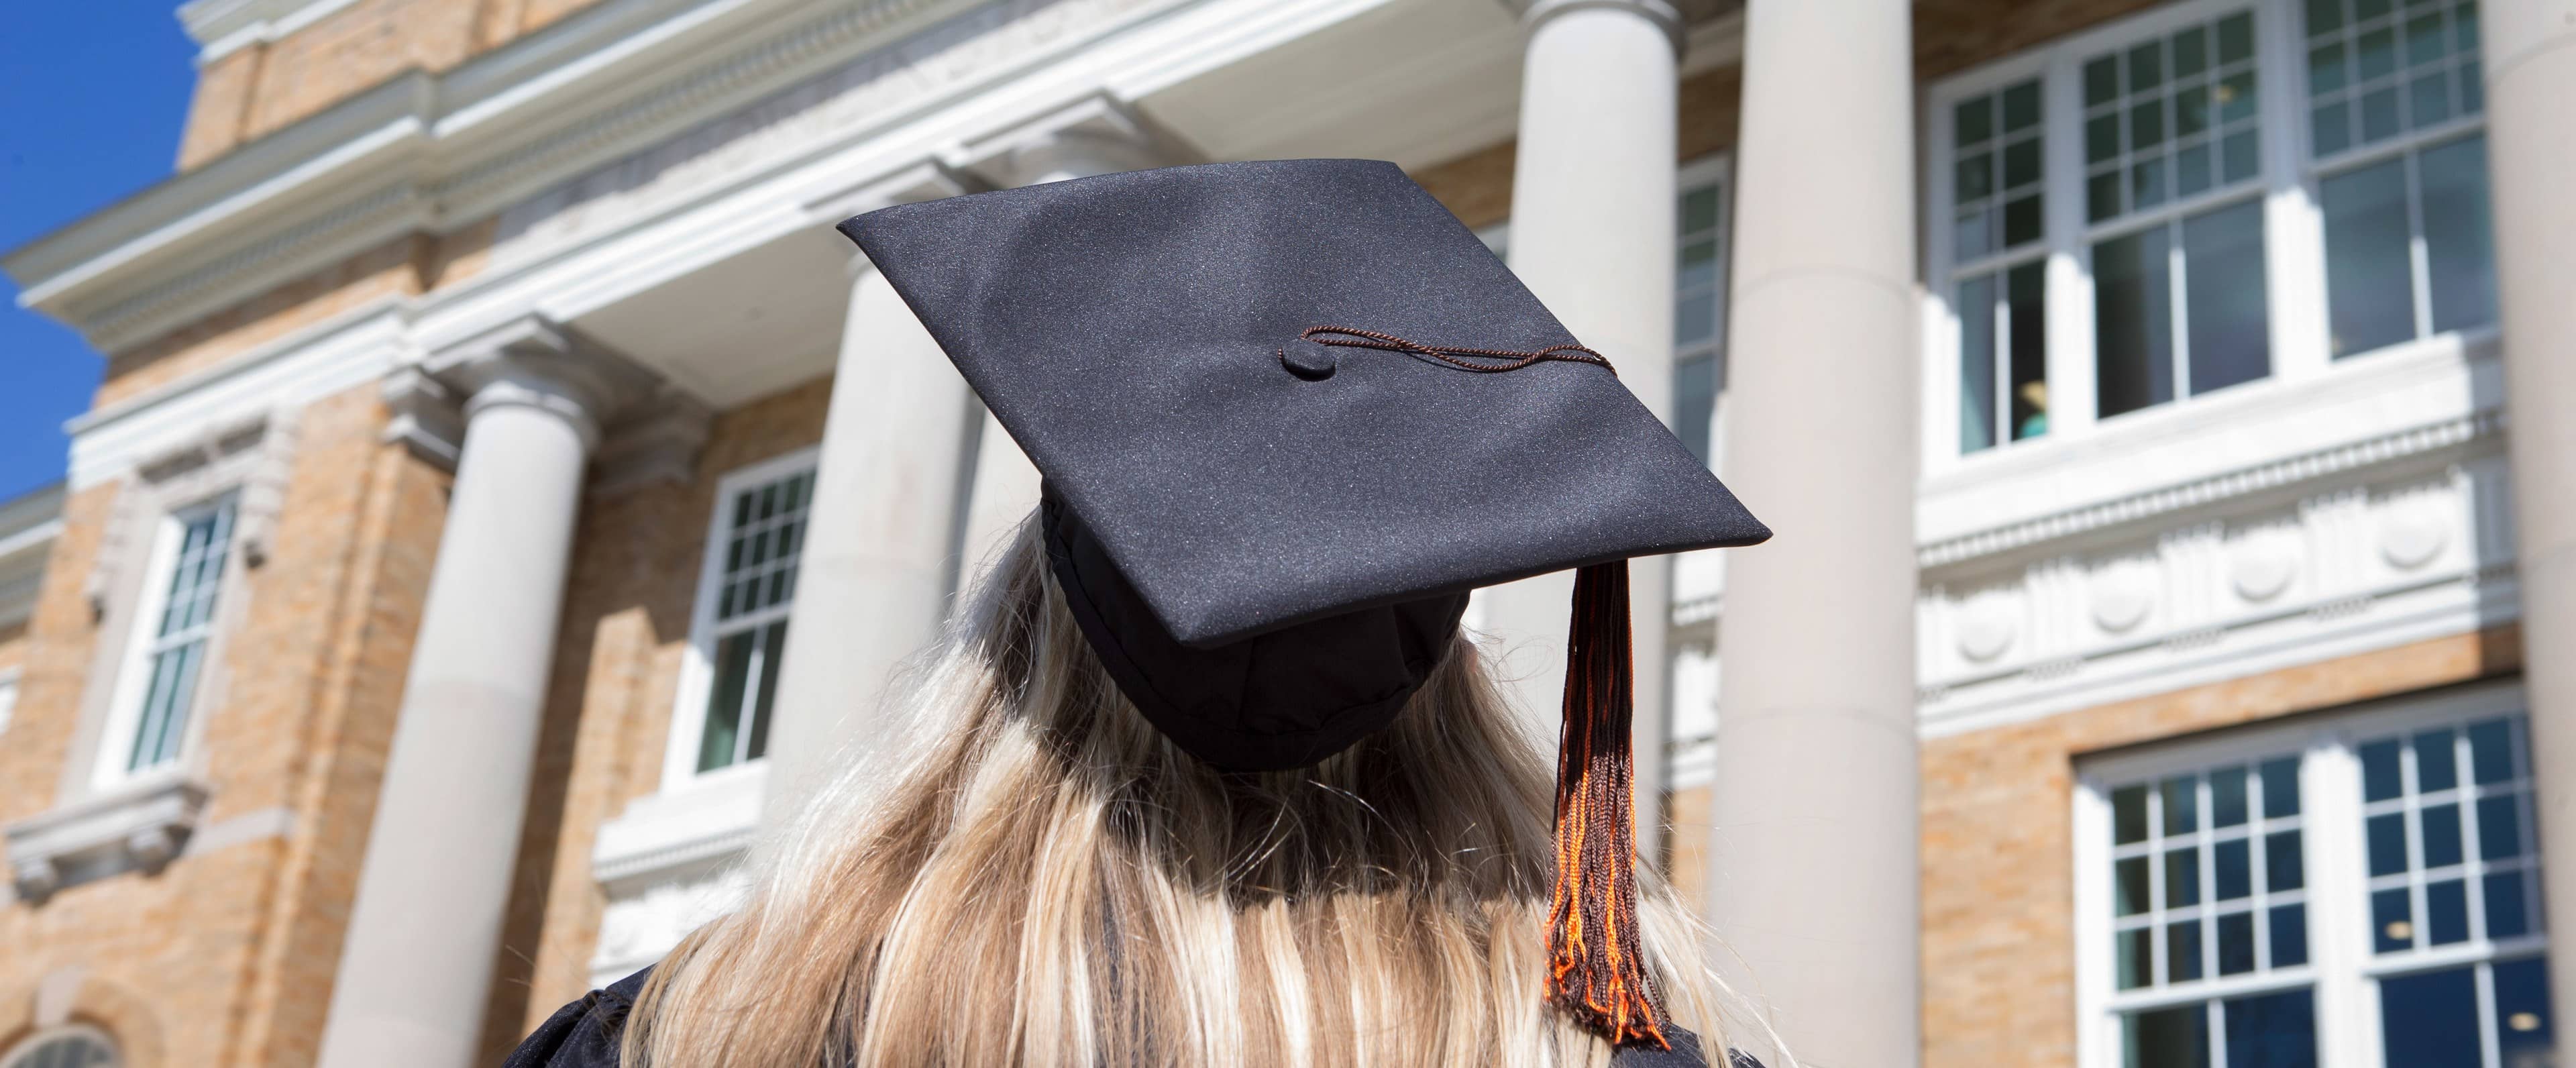 BGSU to host fall commencement on Dec  9 10